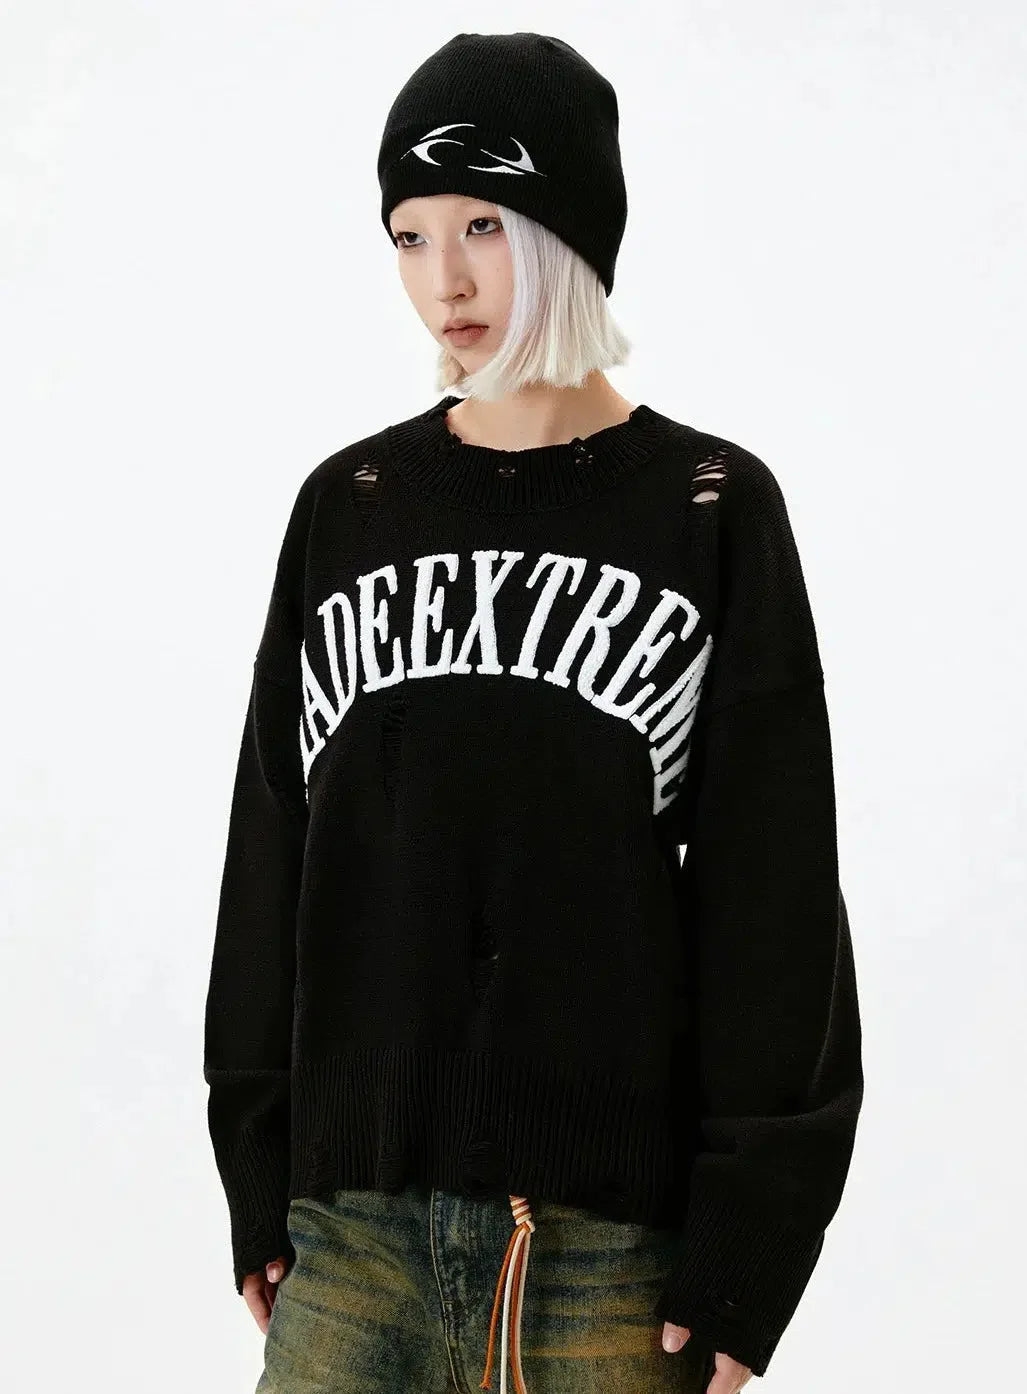 Curved Logo Distressed Sweater Korean Street Fashion Sweater By Made Extreme Shop Online at OH Vault